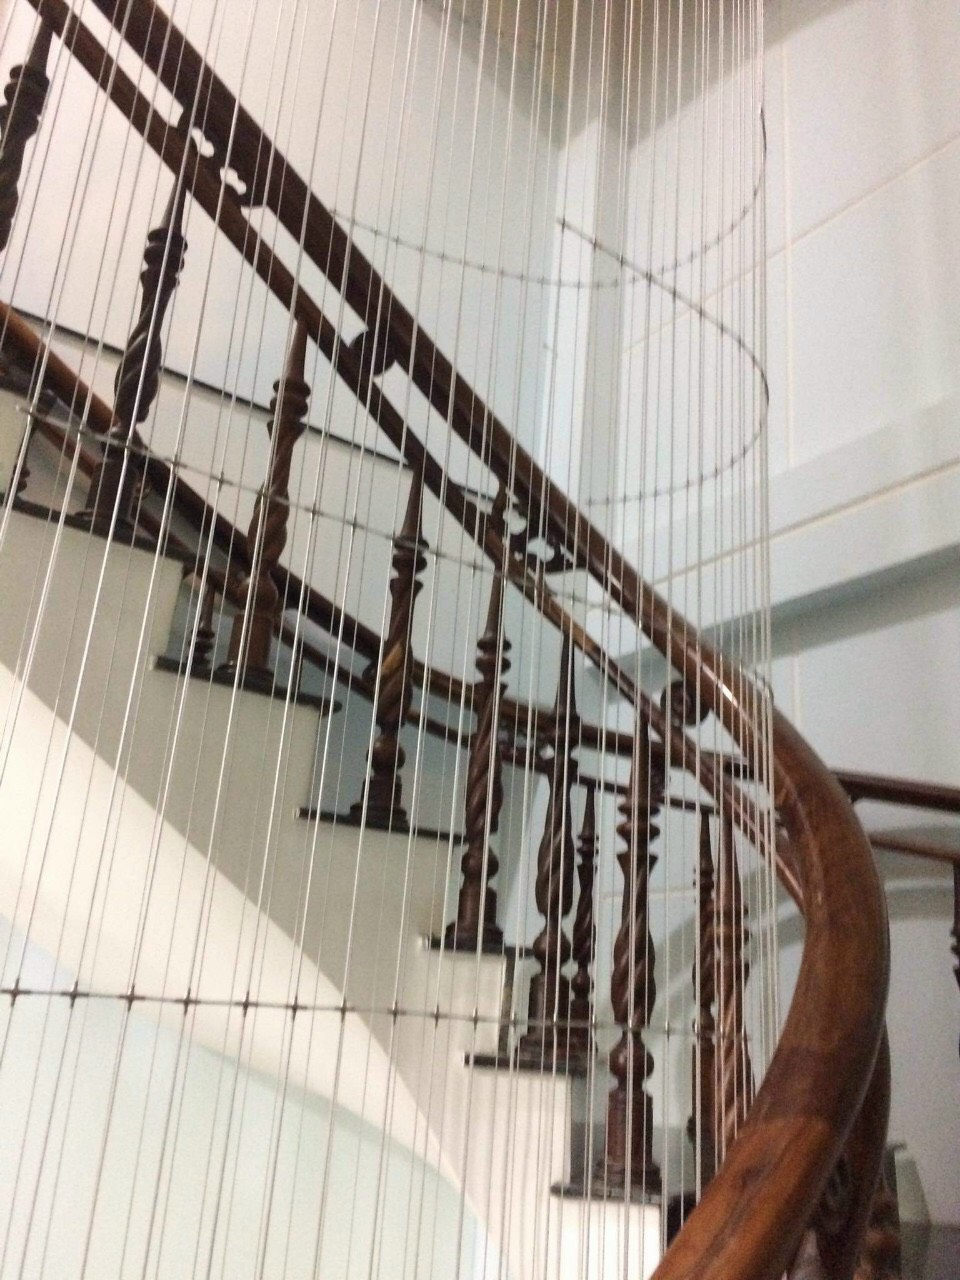 Safety net of stairs